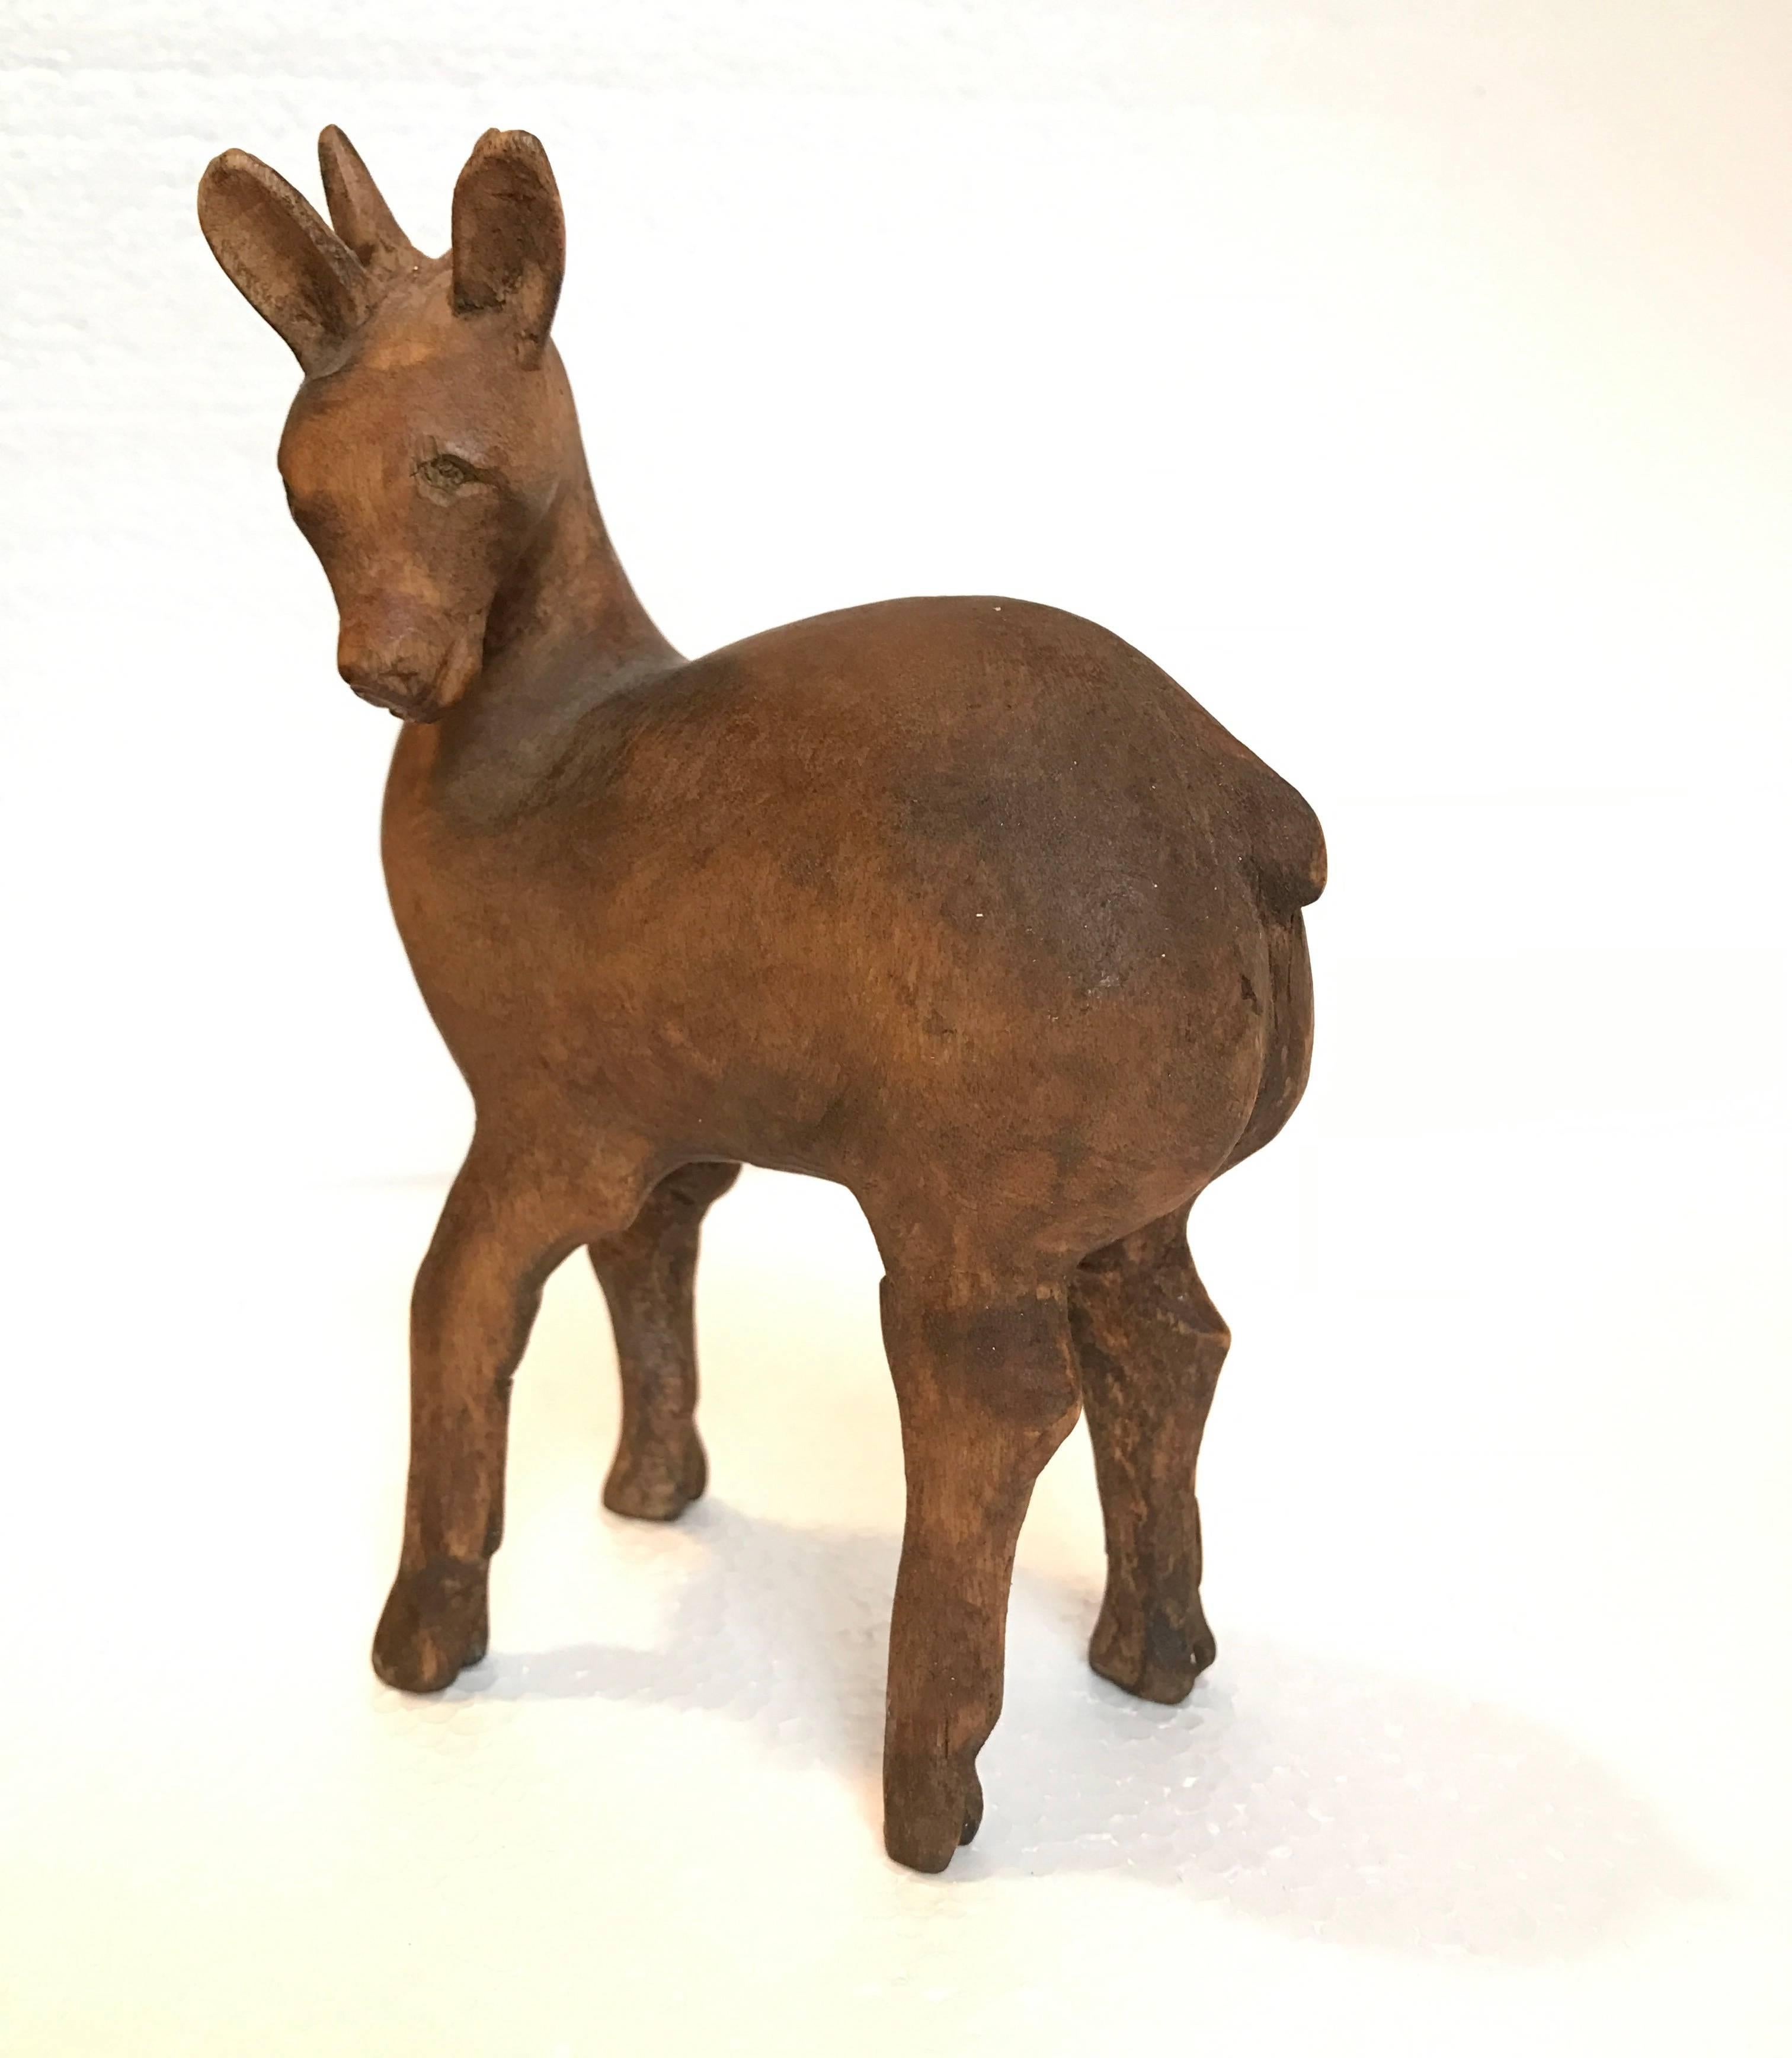 Hand-Carved Small Wooden Deer Sculpture